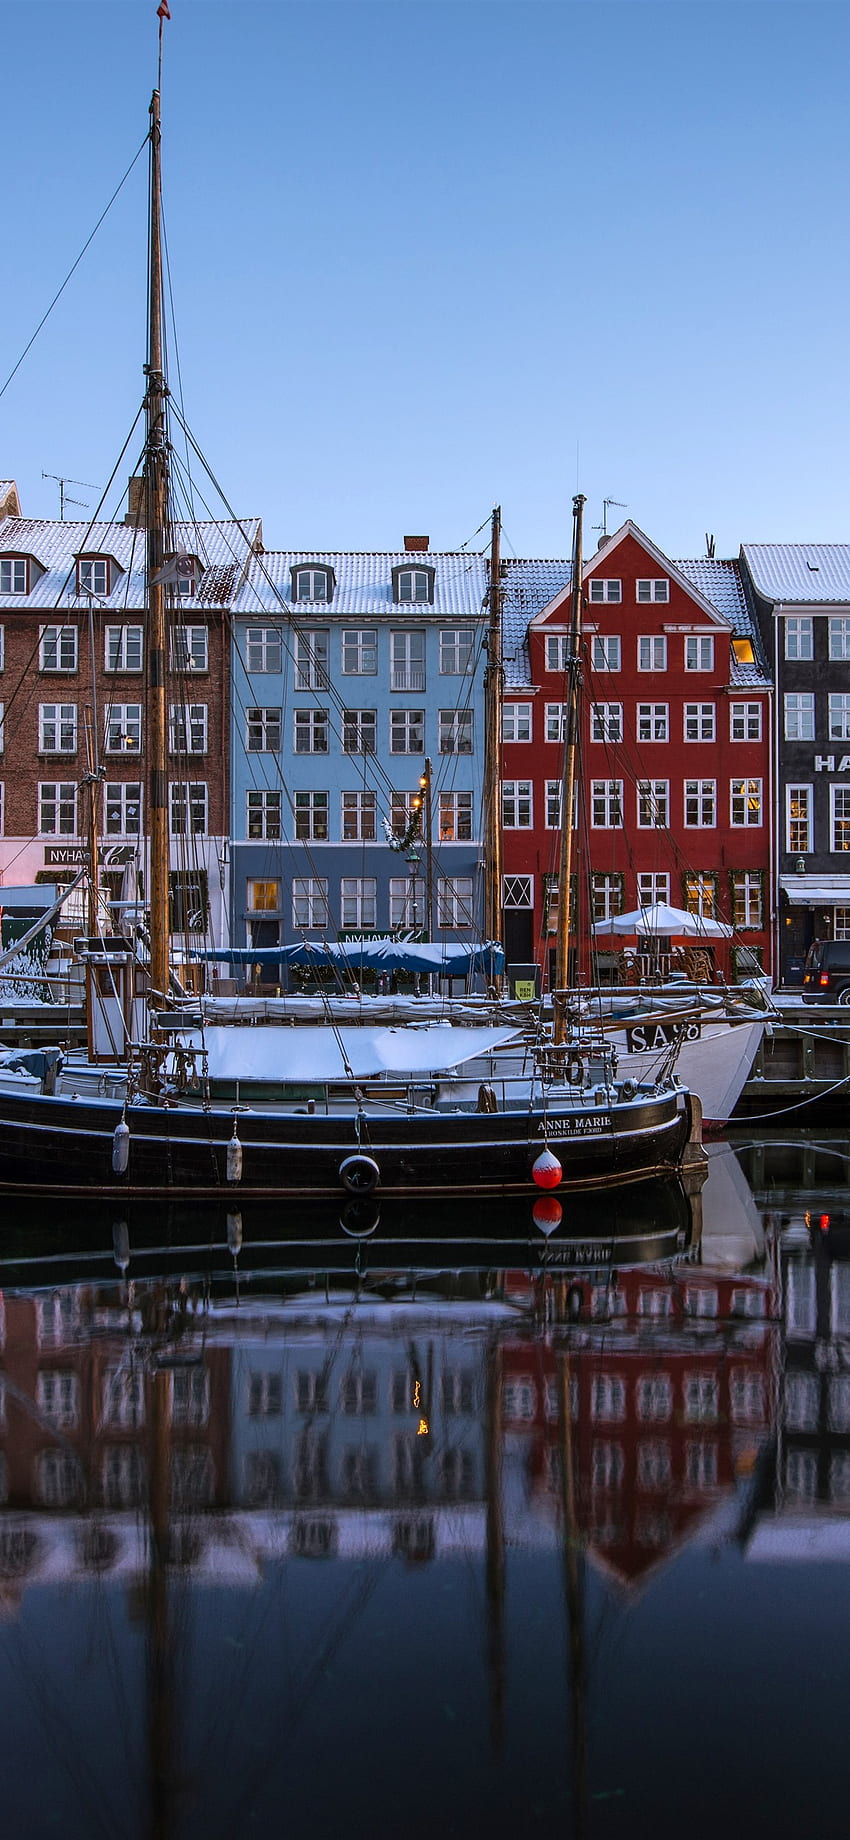 Denmark | The Land of Vikings and Fairytales